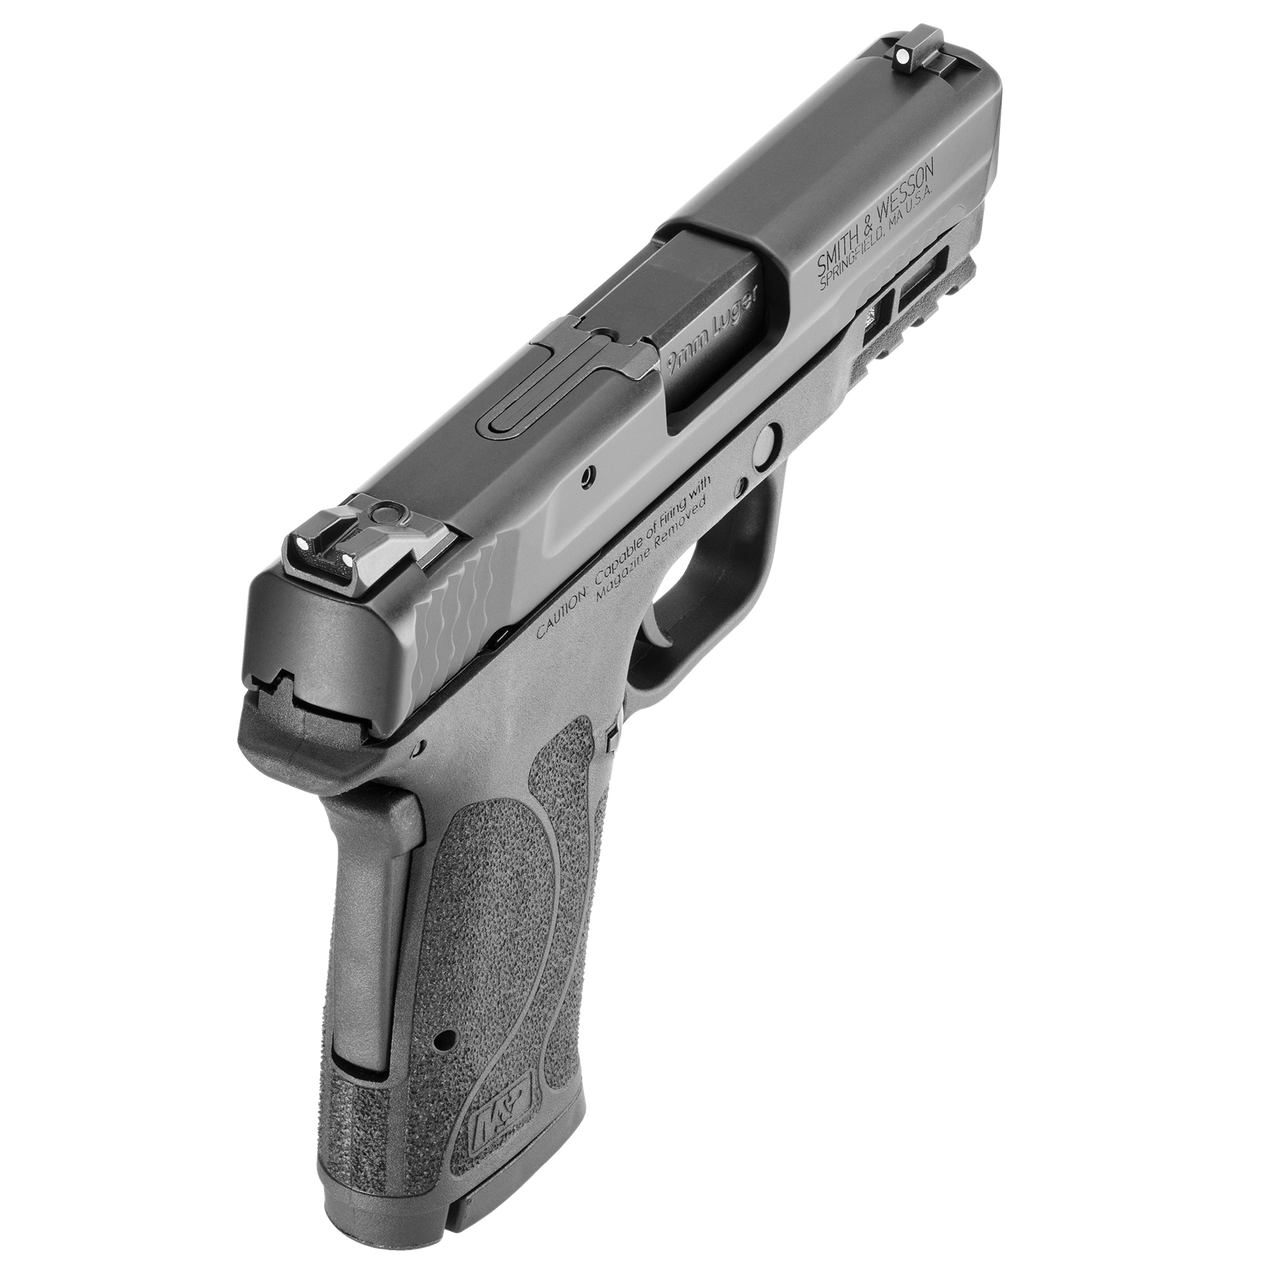 M&P®9 SHIELD EZ® NO THUMB SAFETY | Smith & Wesson